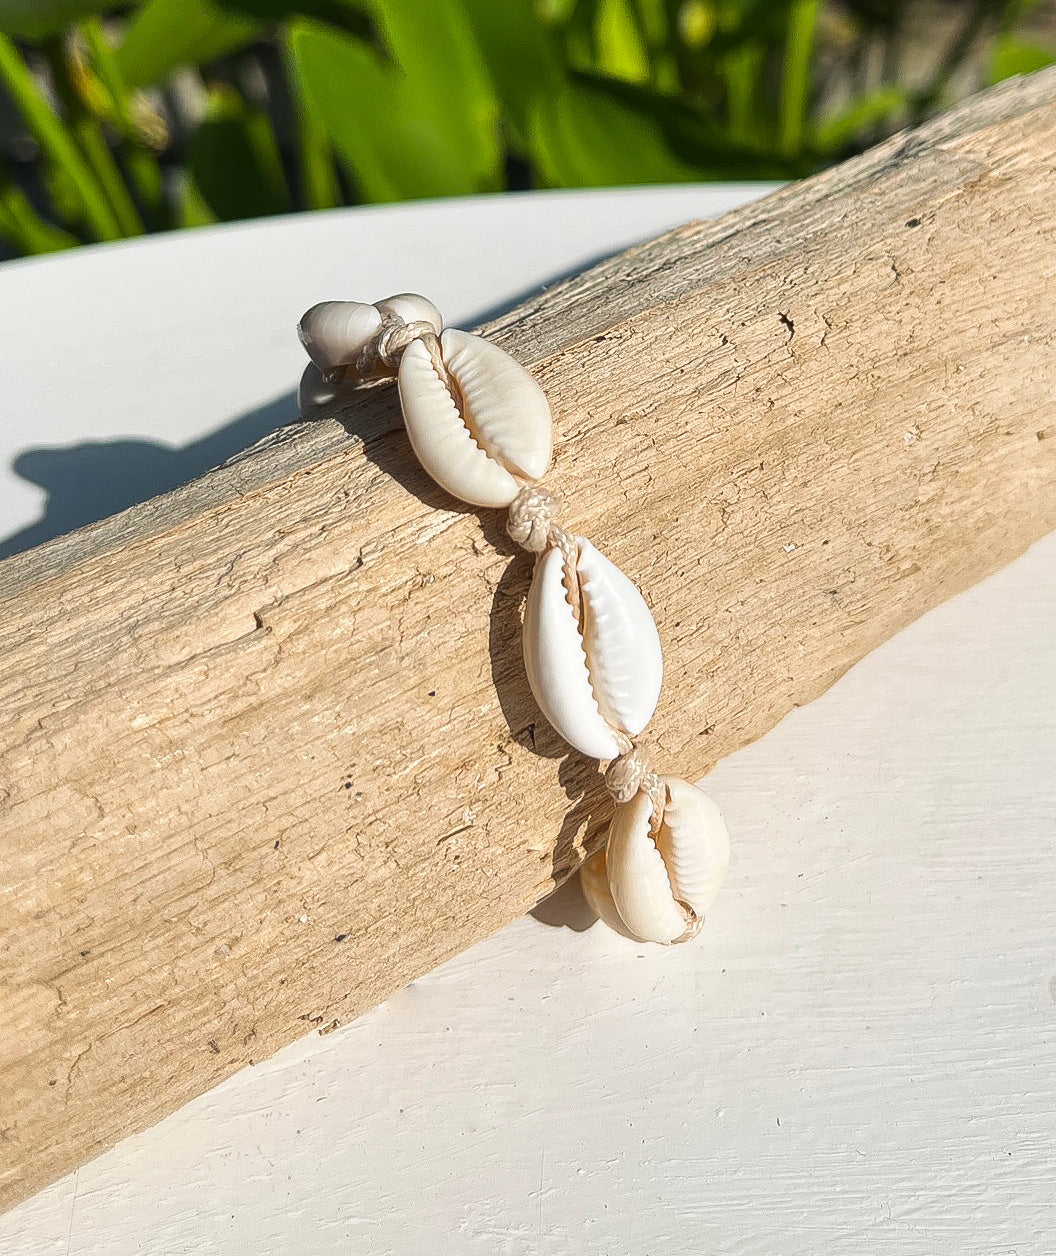 Authentic South African Cowrie shell bracelet – EverythingZulu